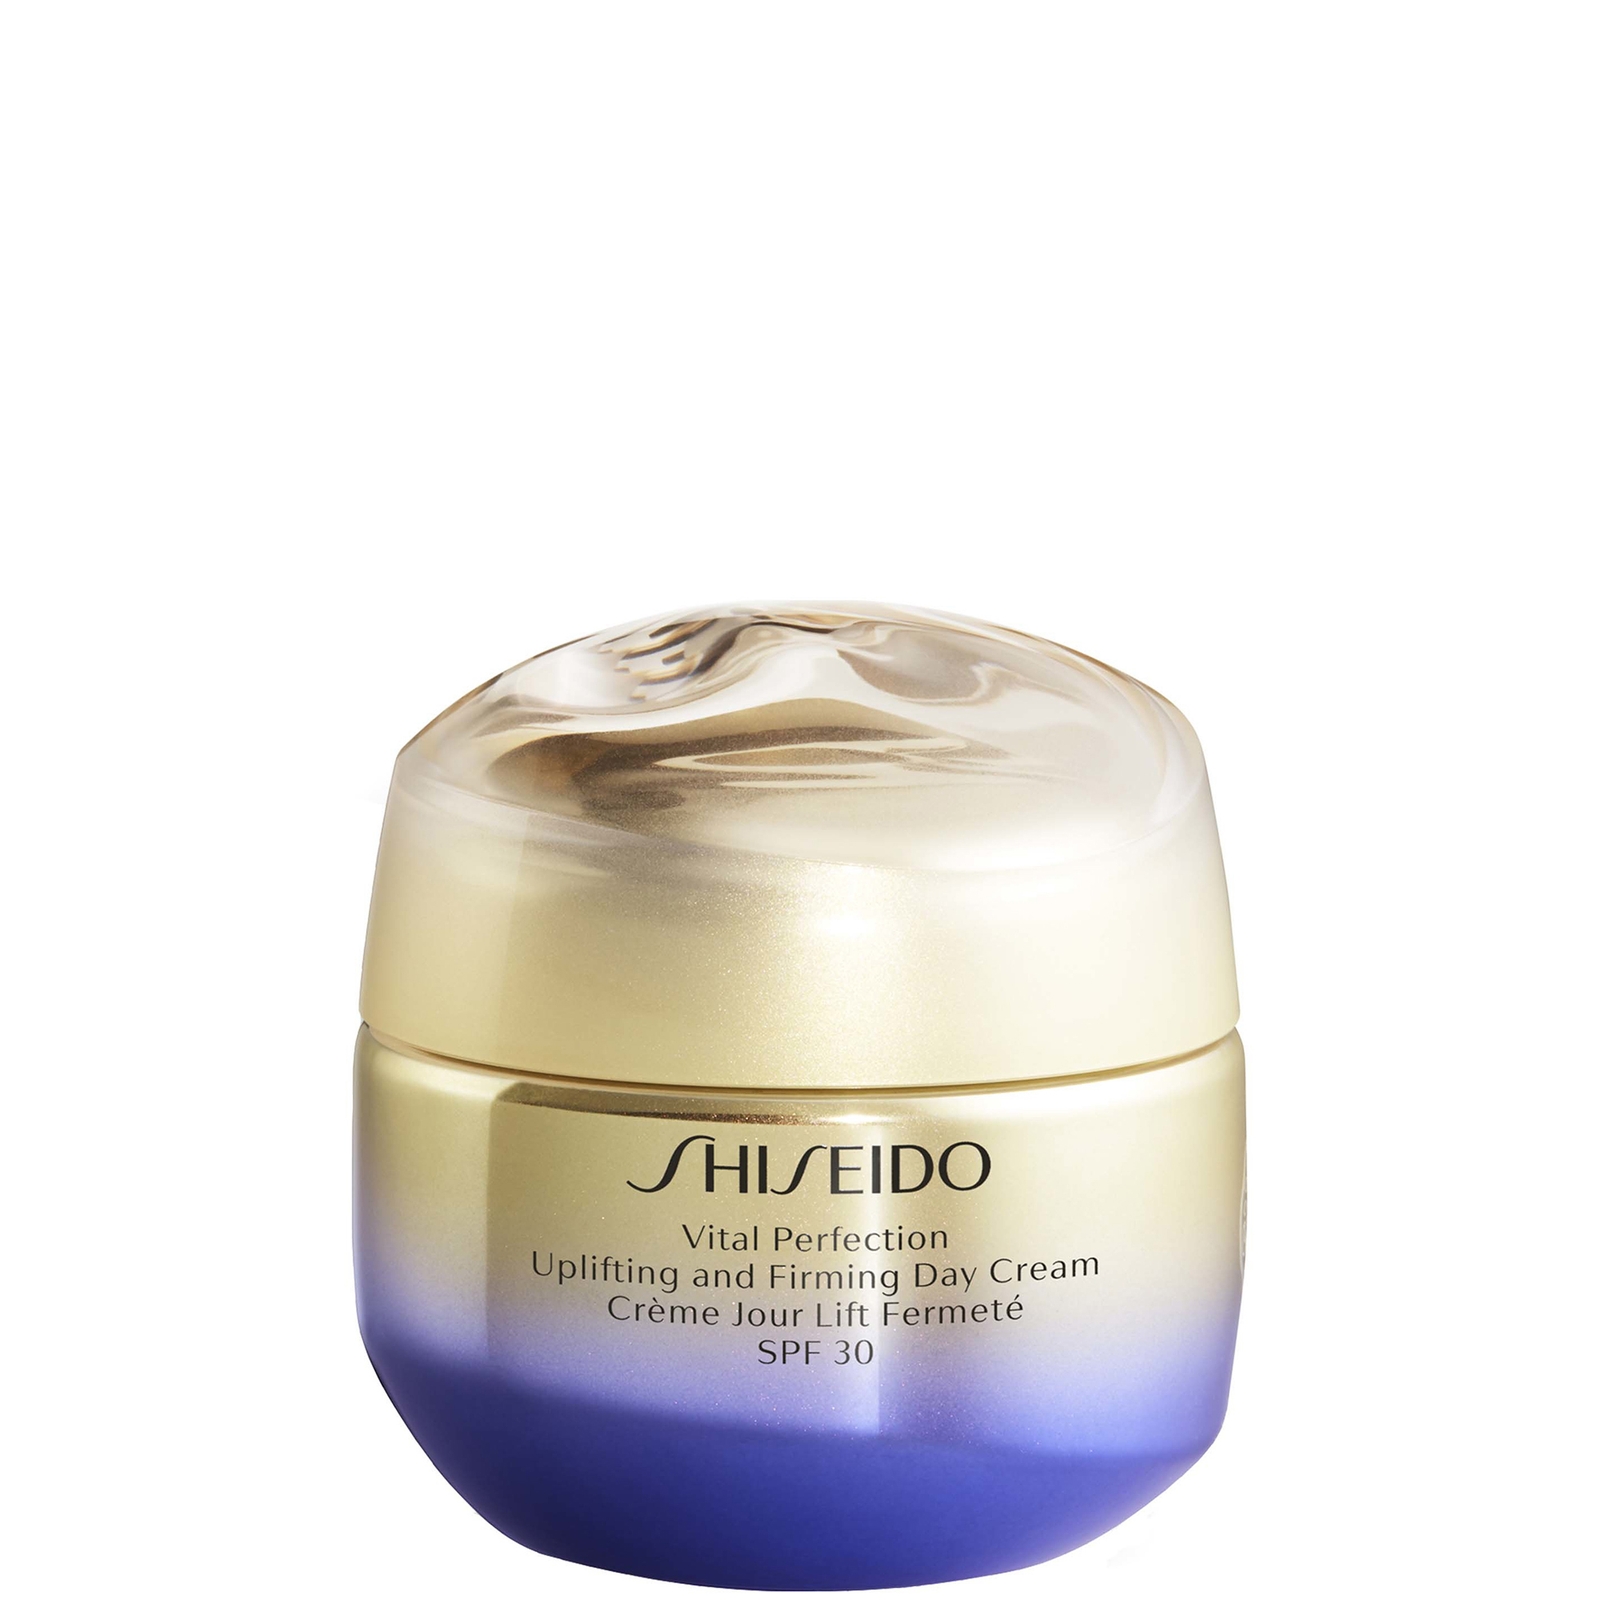 Photos - Cream / Lotion Shiseido Vital Perfection Uplifting and Firming Day Cream SPF30 